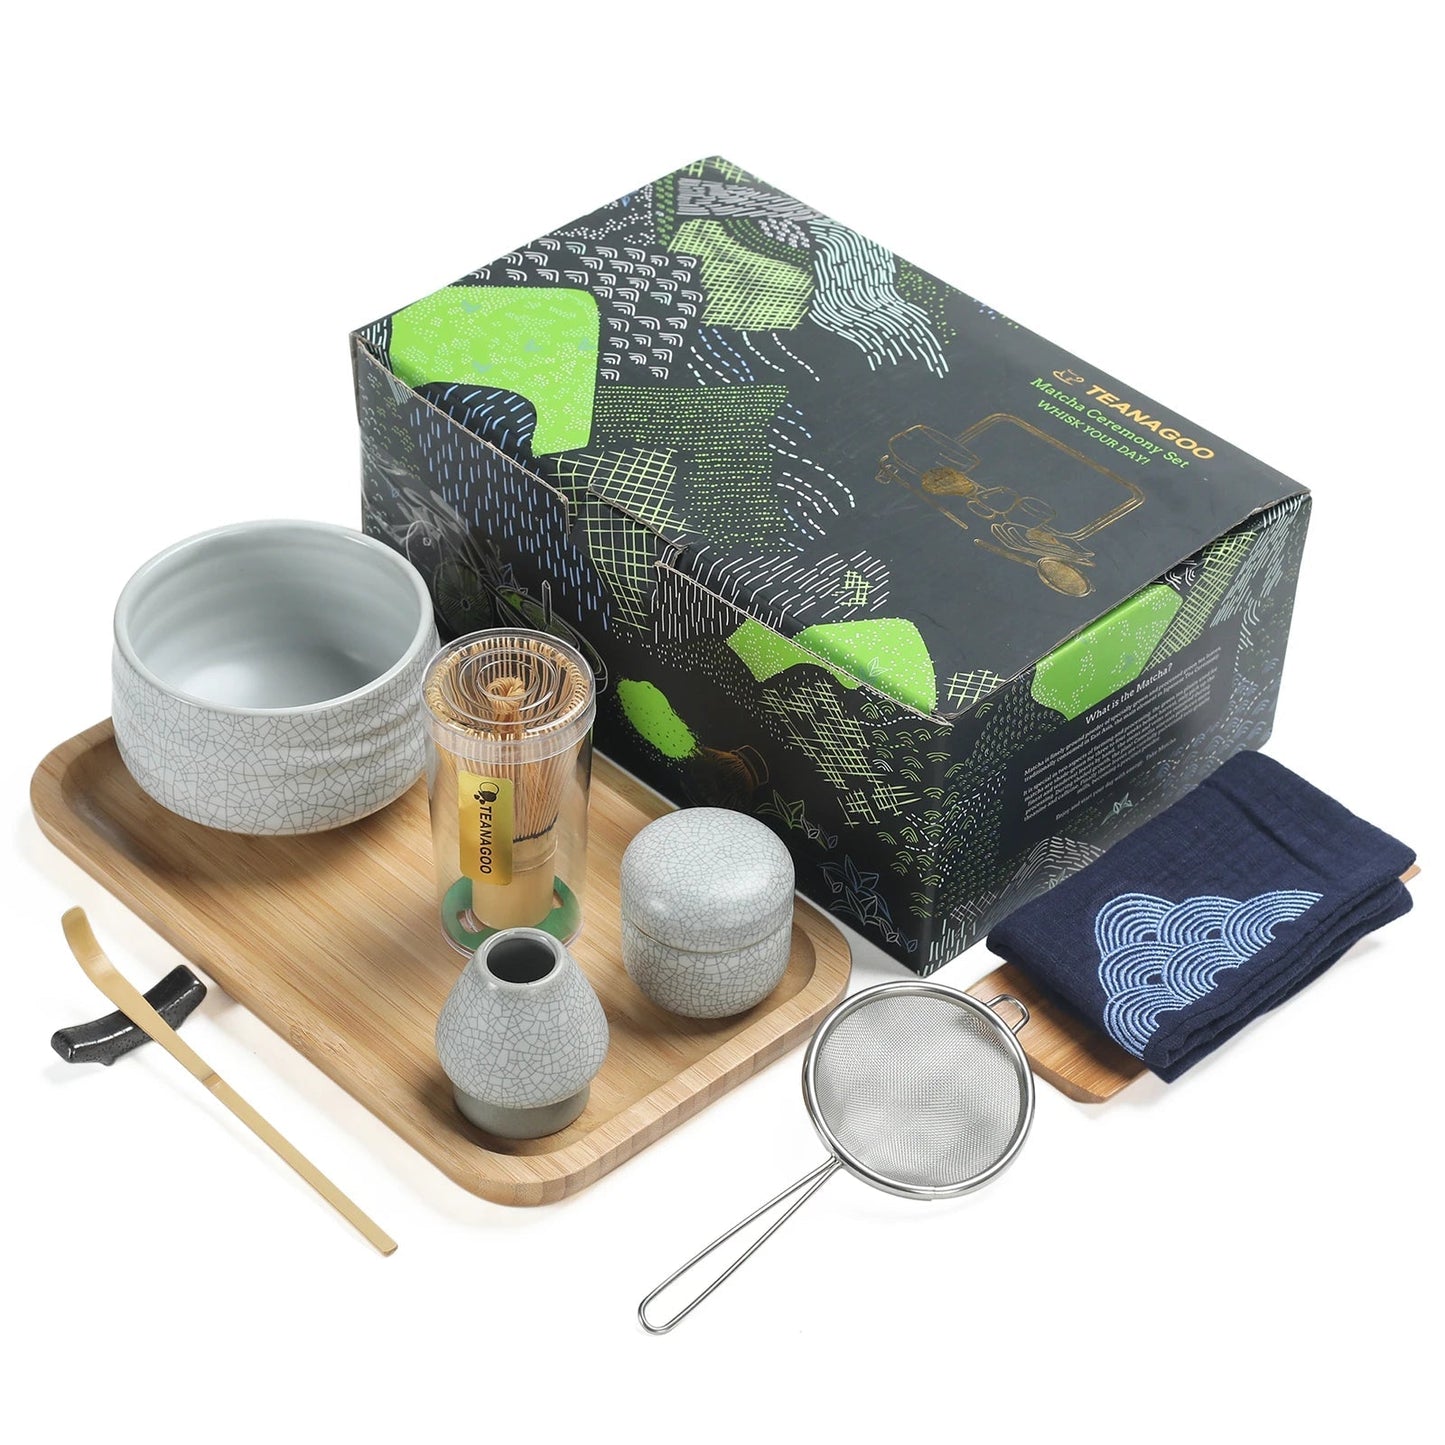 https://www.teanagoo.com/cdn/shop/products/luxury-japanese-matcha-tea-set-with-bamboo-tea-tray-canister-various-color-293426.jpg?v=1659432995&width=1445